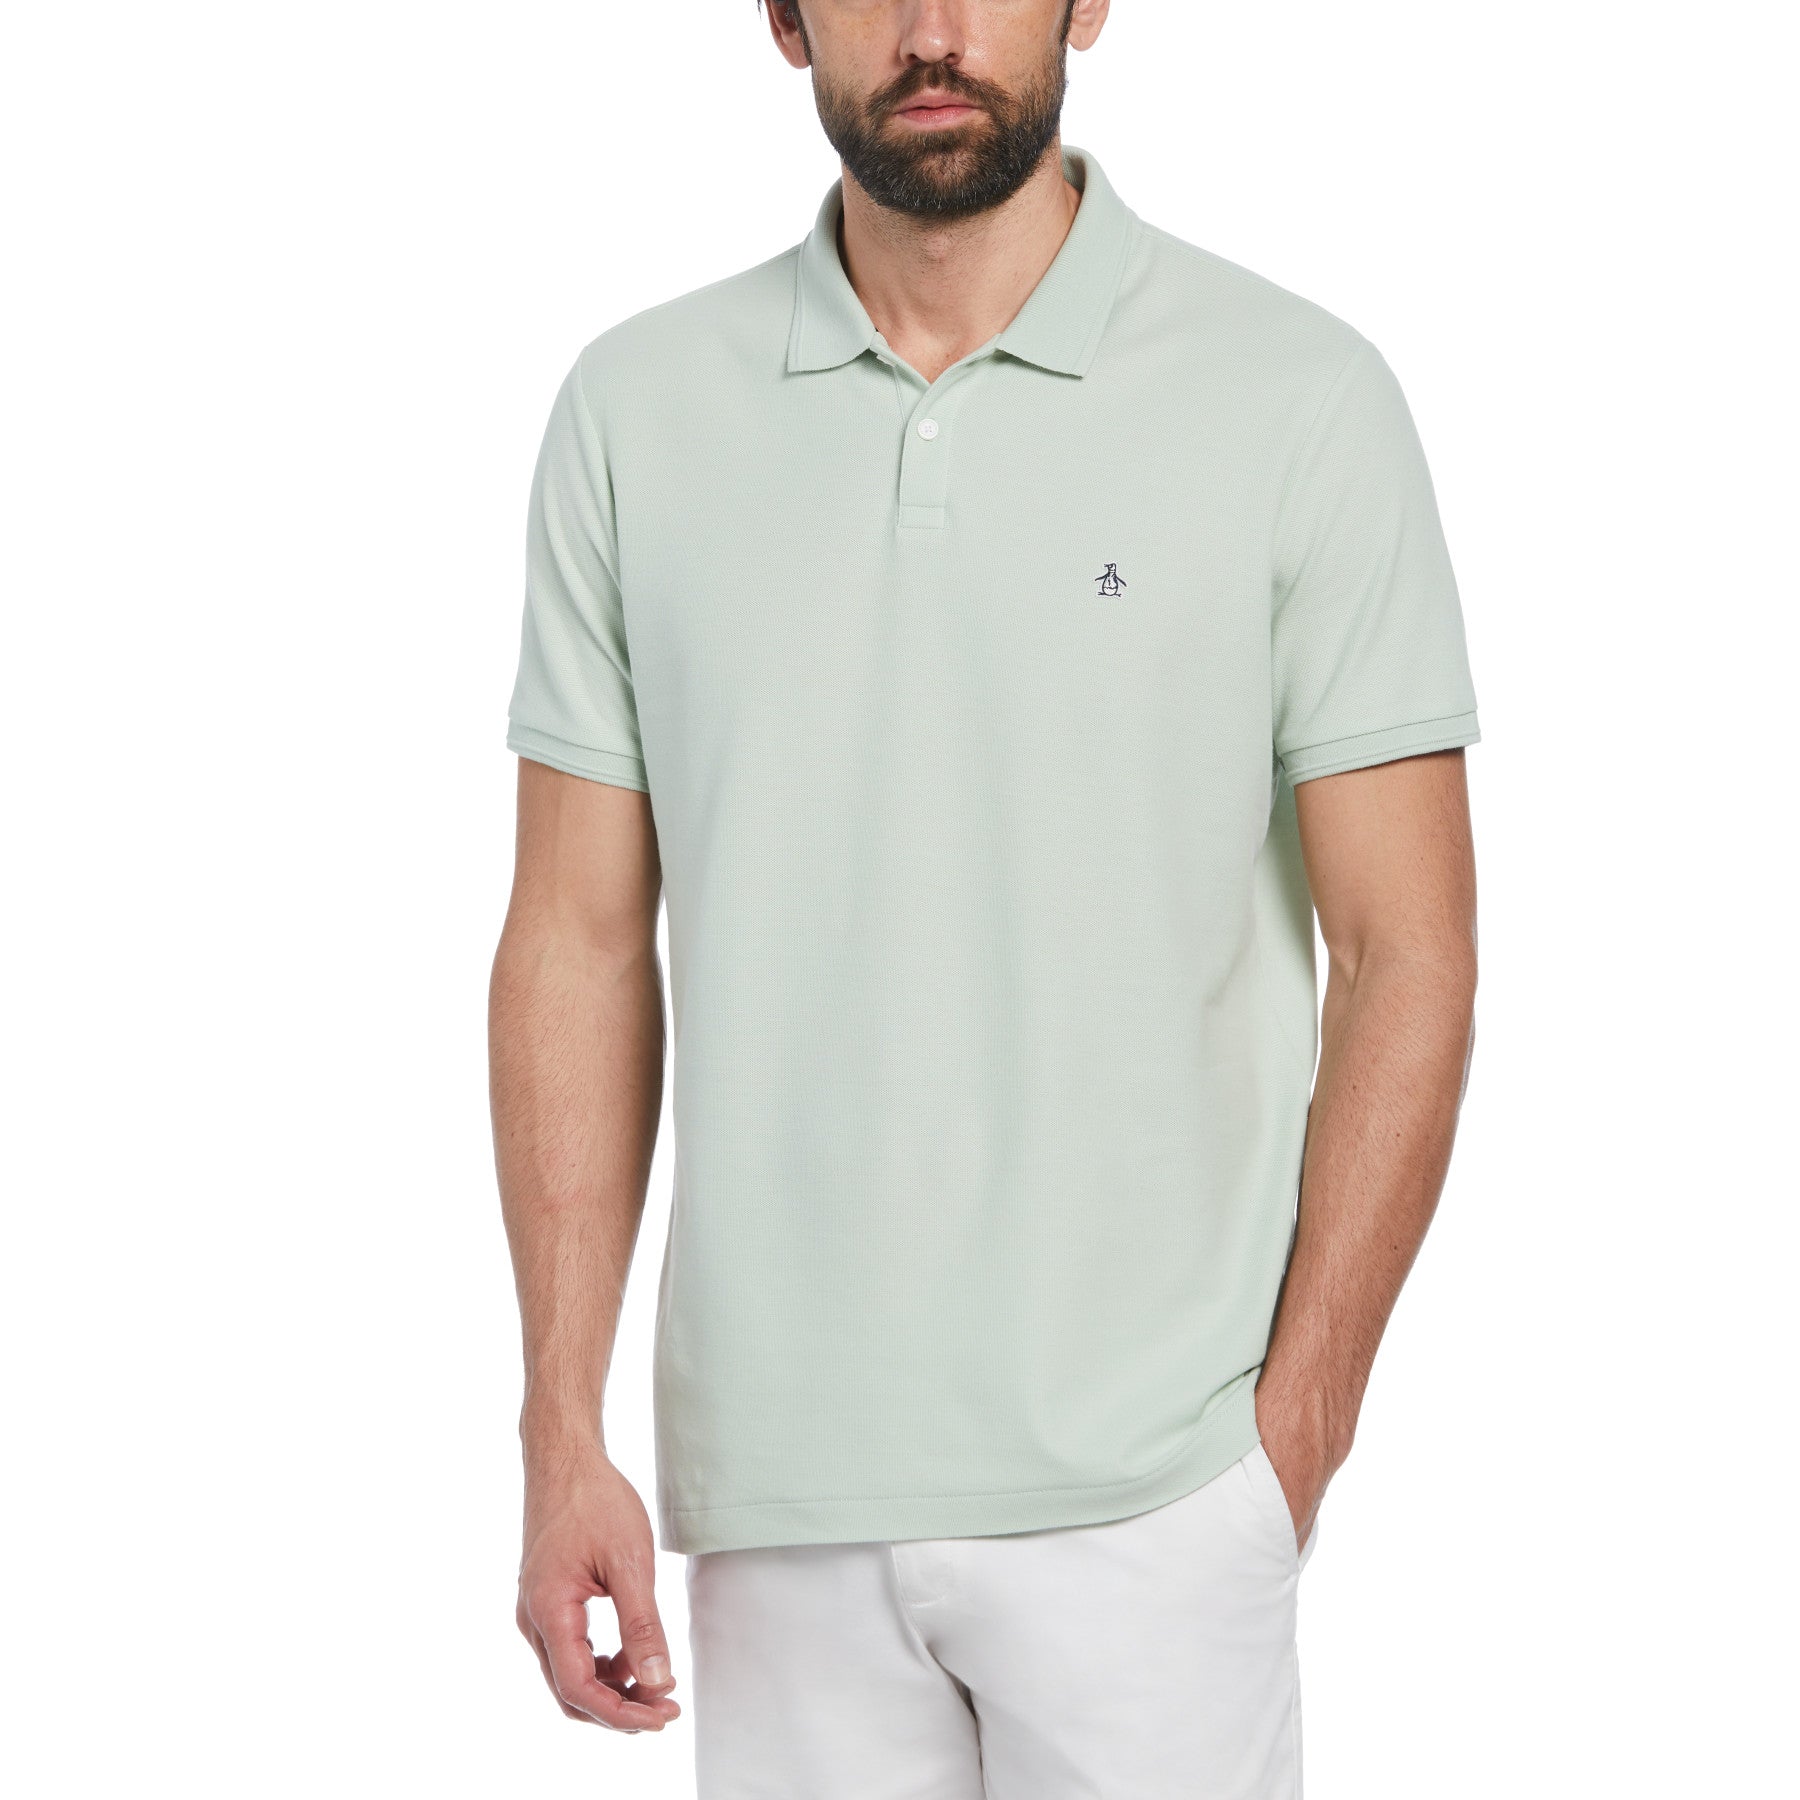 View Sticker Pete Daddy Short Sleeve Polo Shirt In Silt Green information